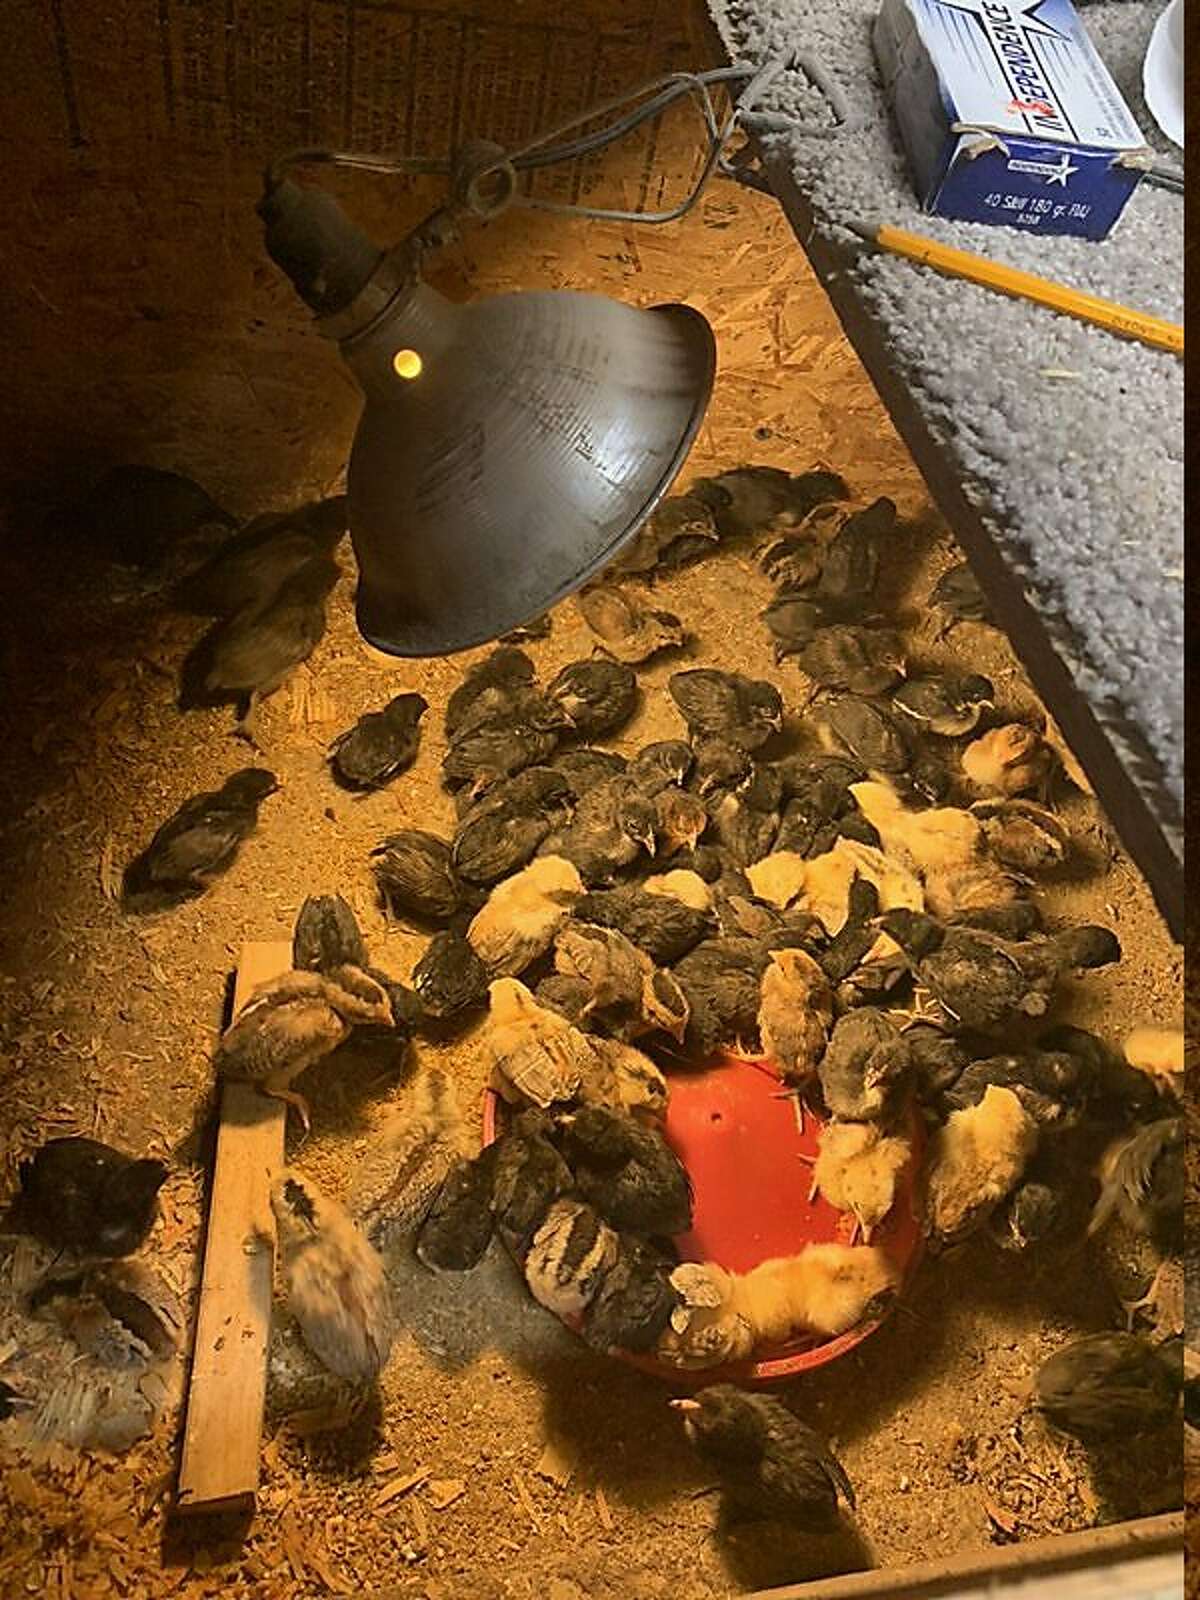 Some of the 400 chicks seized by the Alameda County Sheriff's Office following a cockfighting bust in rural Pleasanton on April 25, 2020.